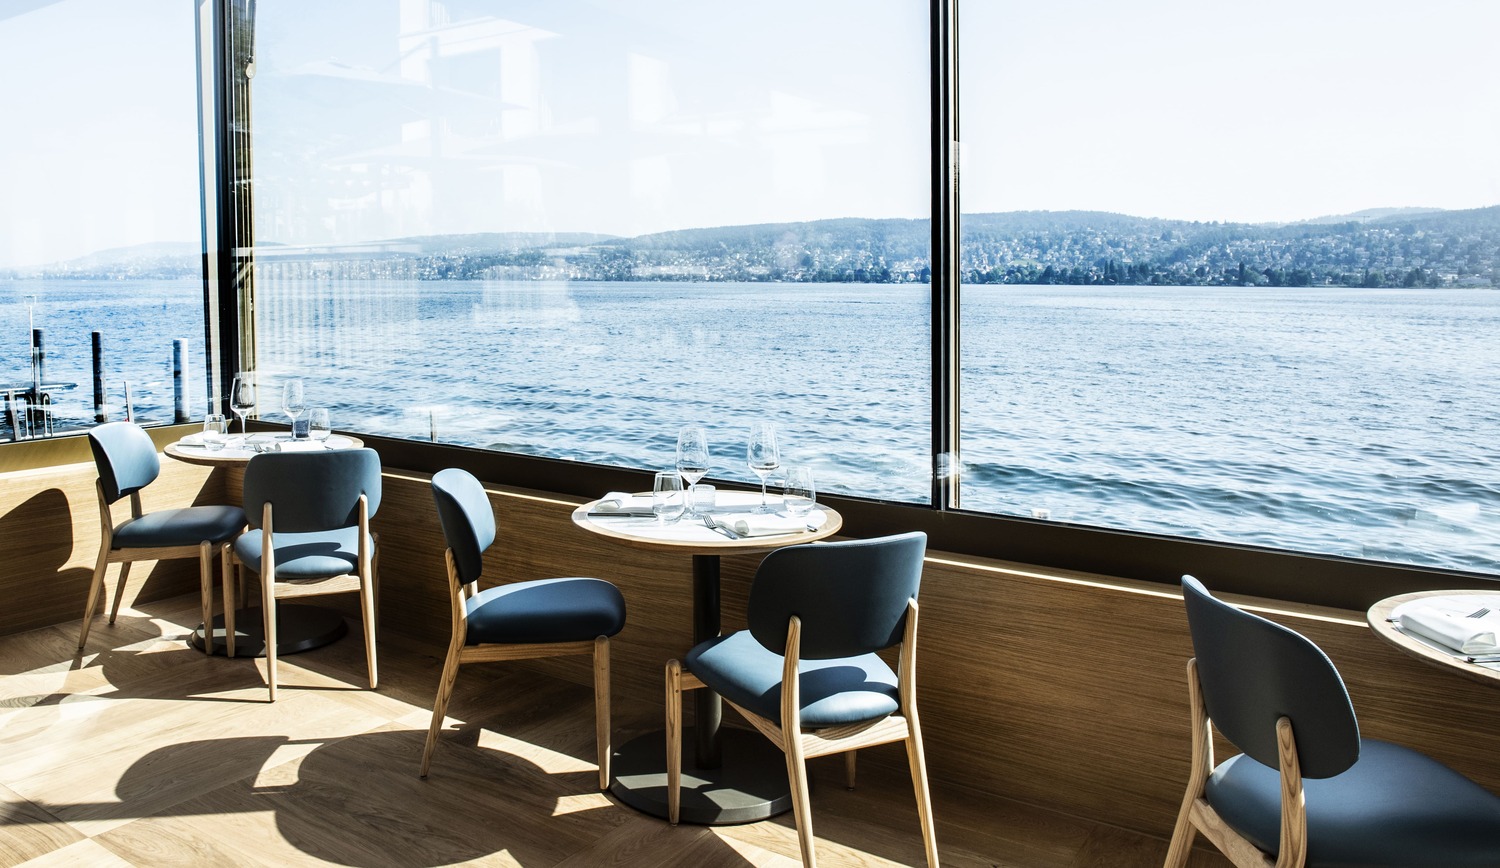 Restaurant with expansive lake view windows